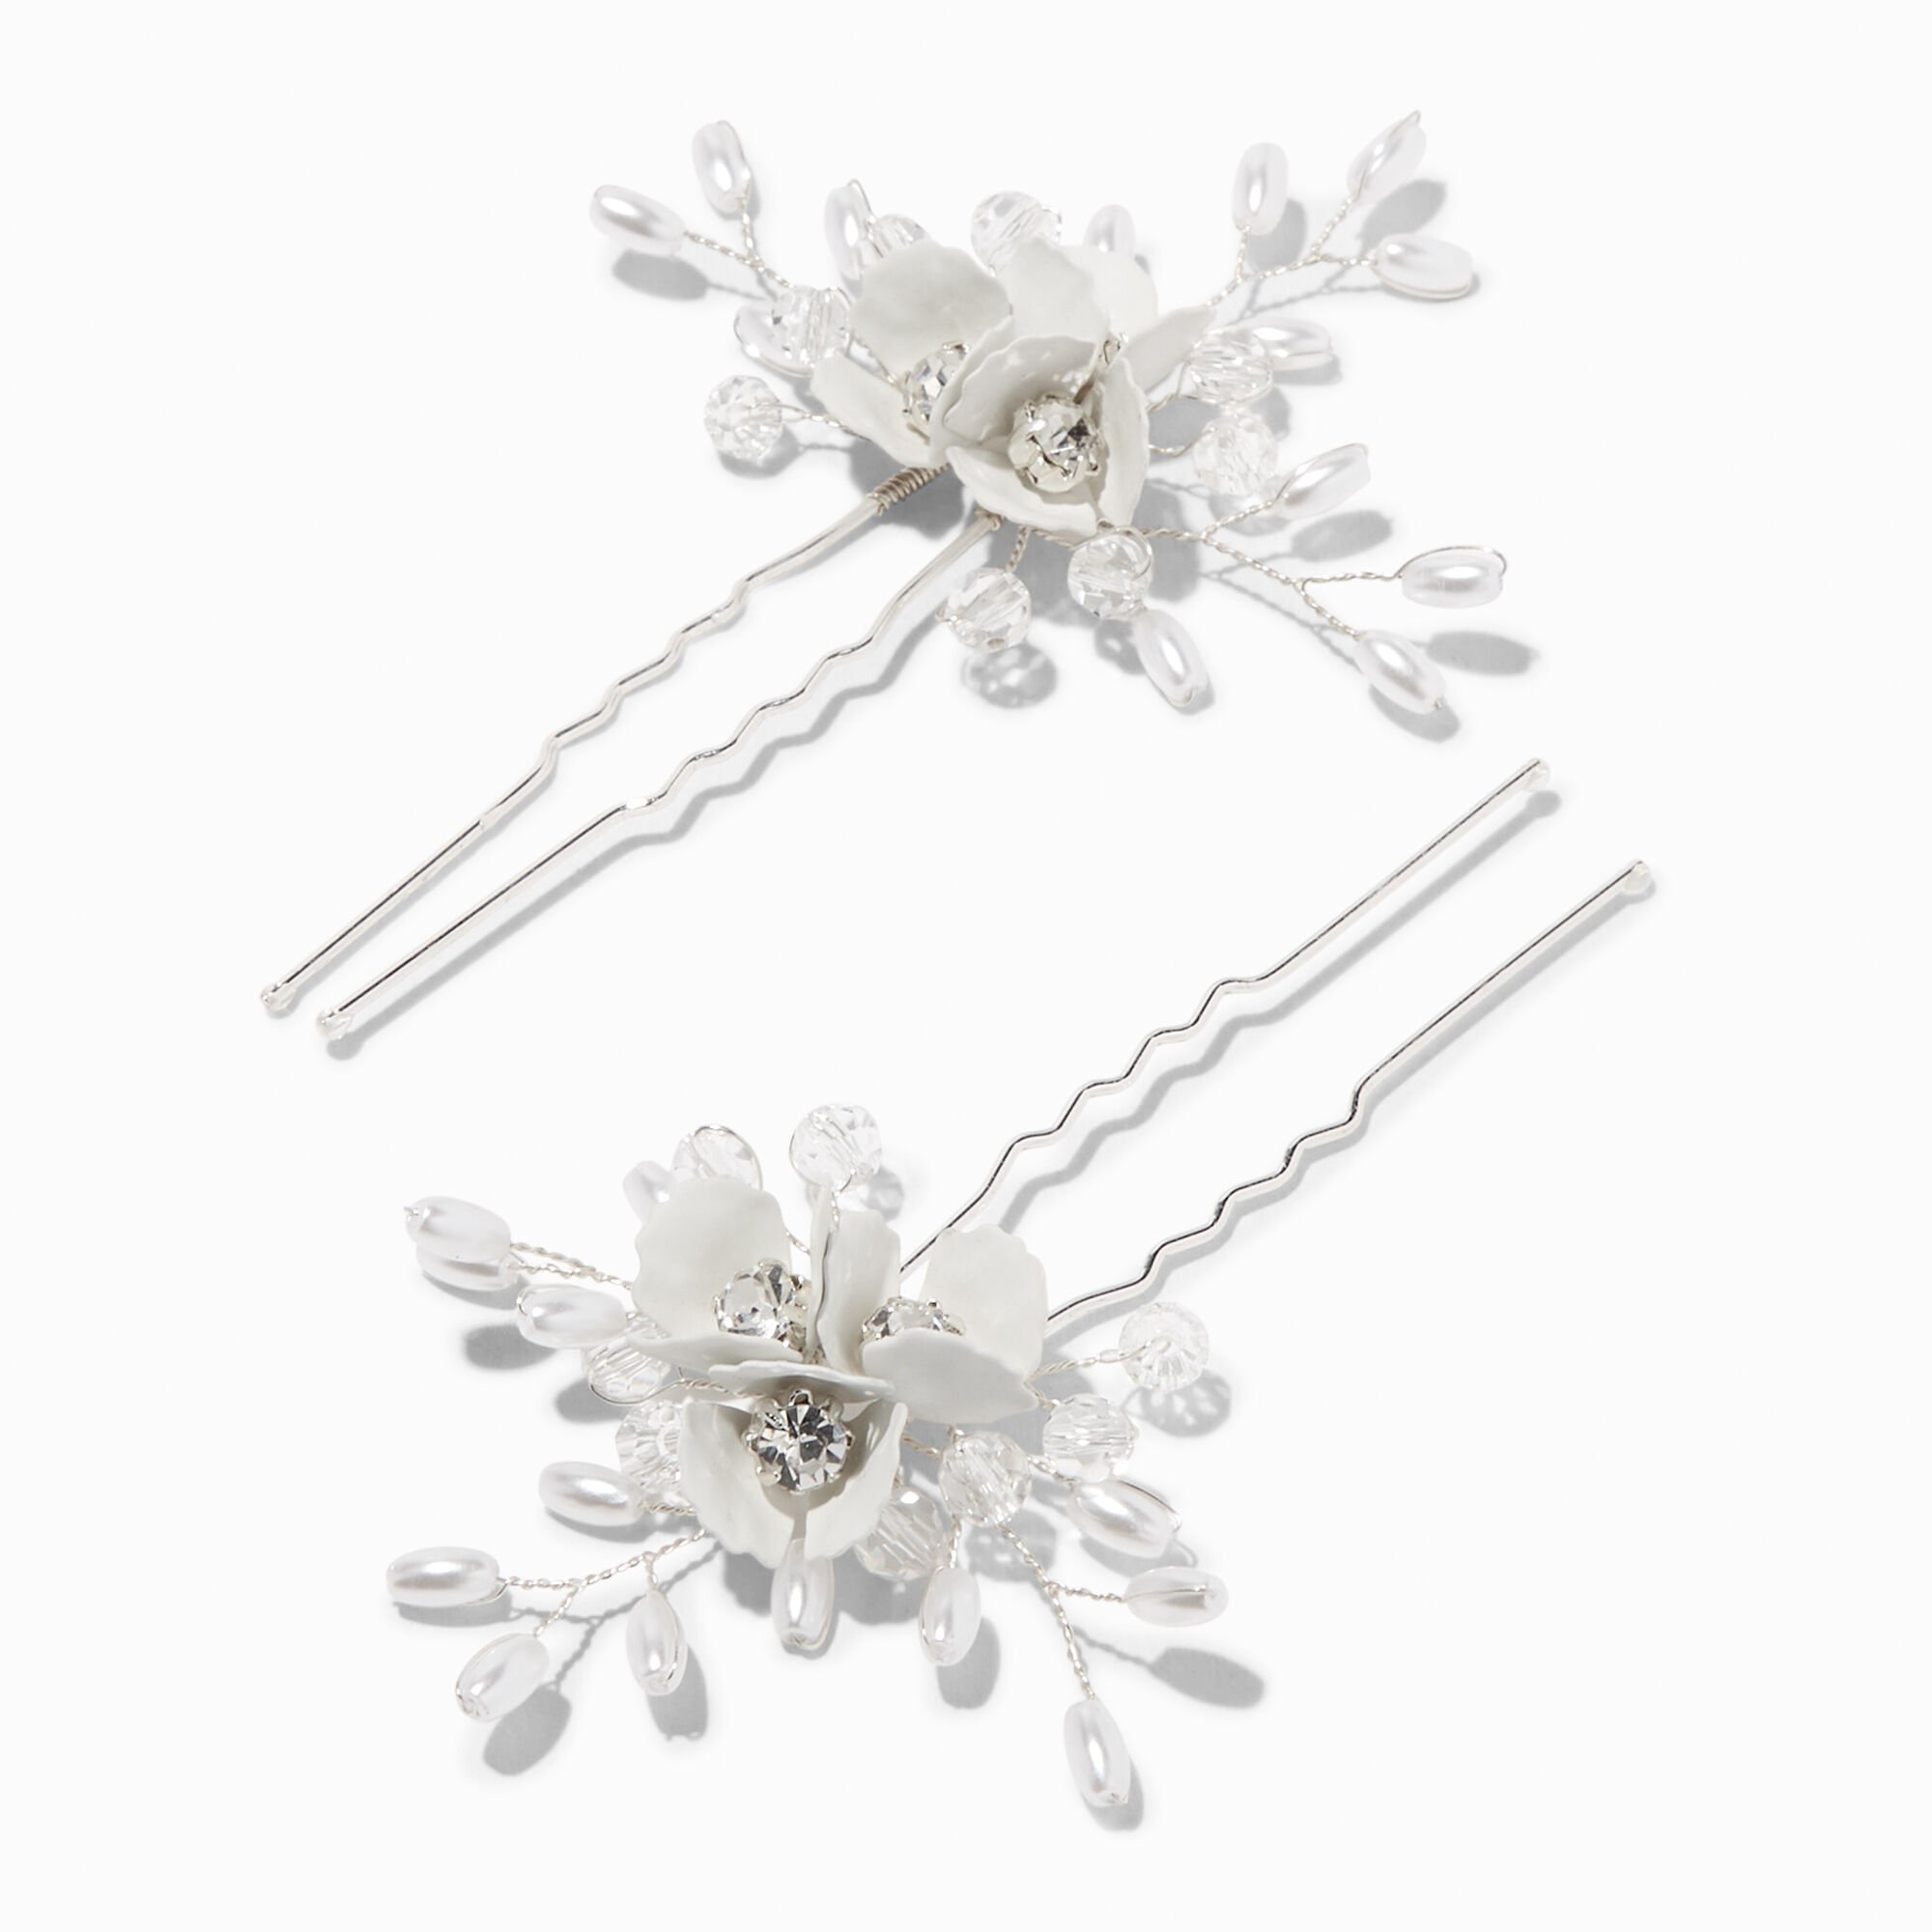 View Claires Crystal Pearl Spray Floral Hair Pins 2 Pack Silver information